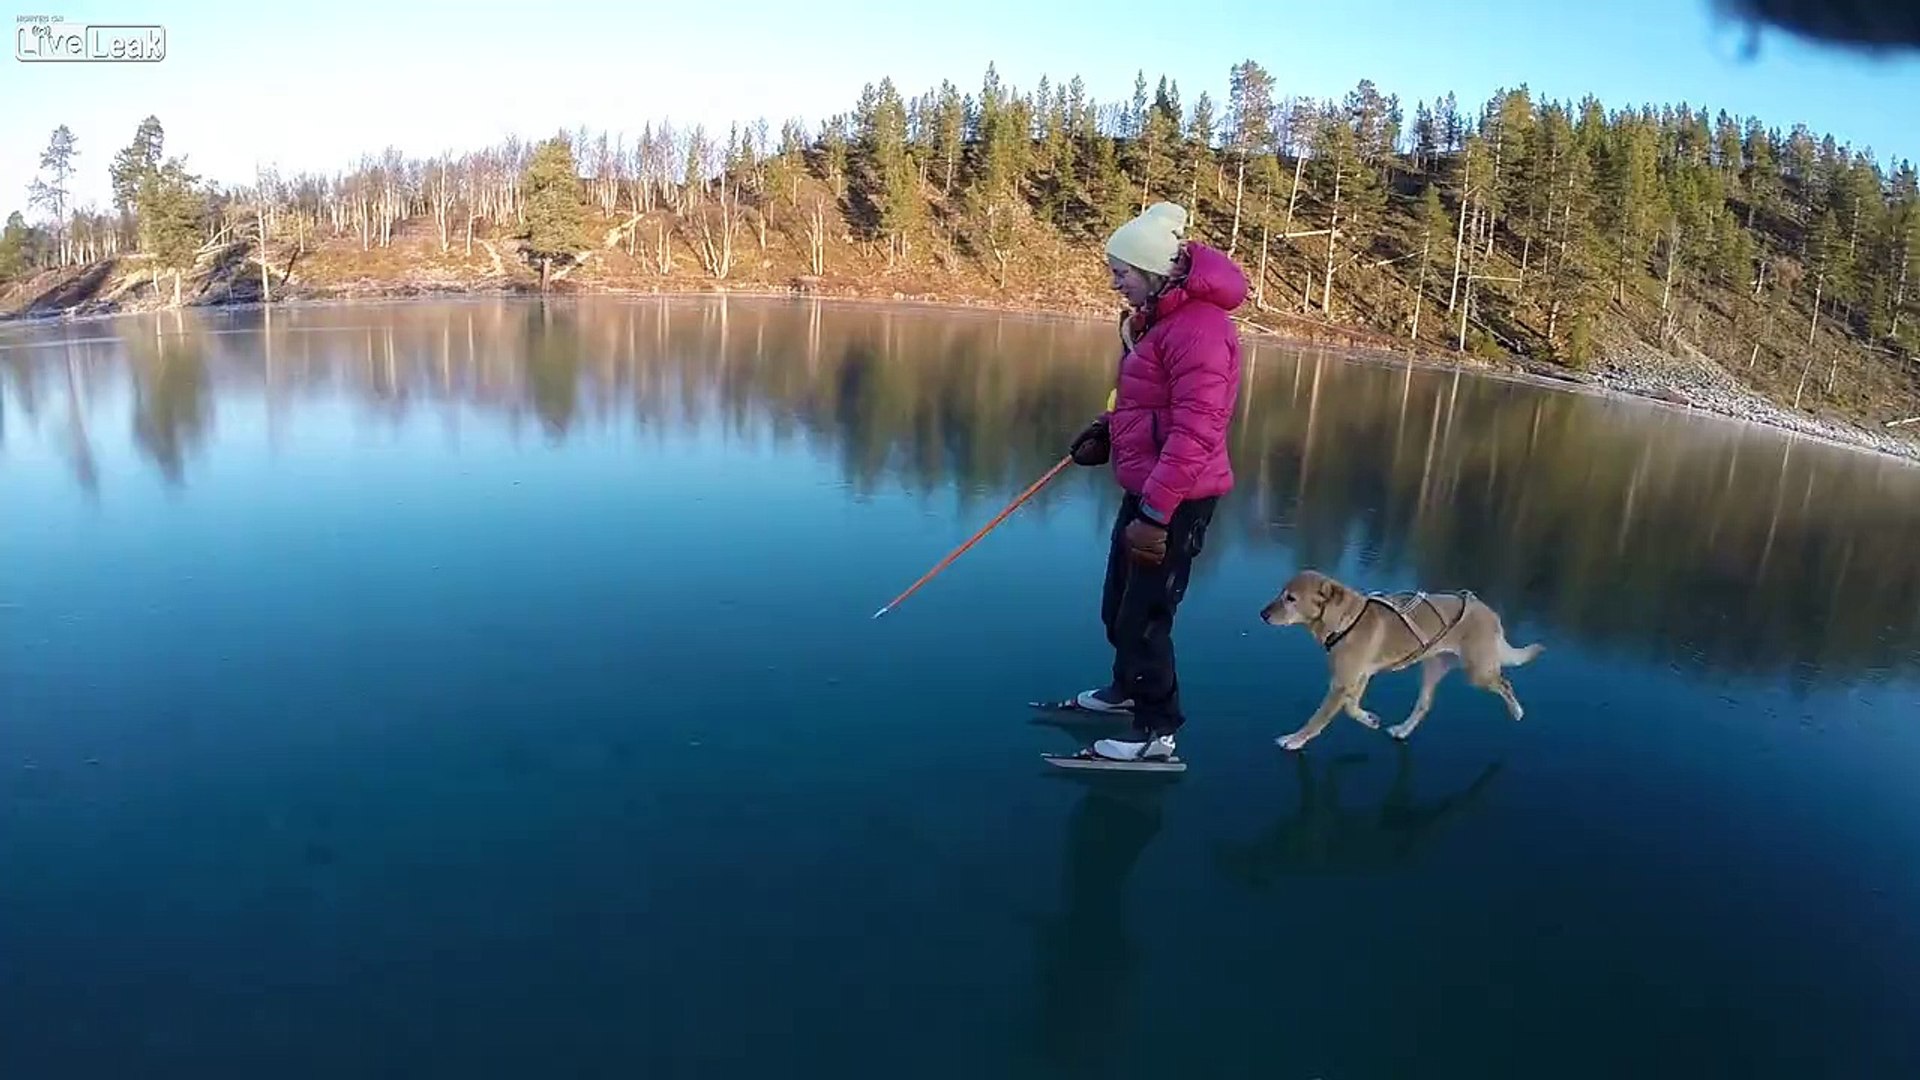 Ice Skating On A Crystal Clear Lake In Sweden